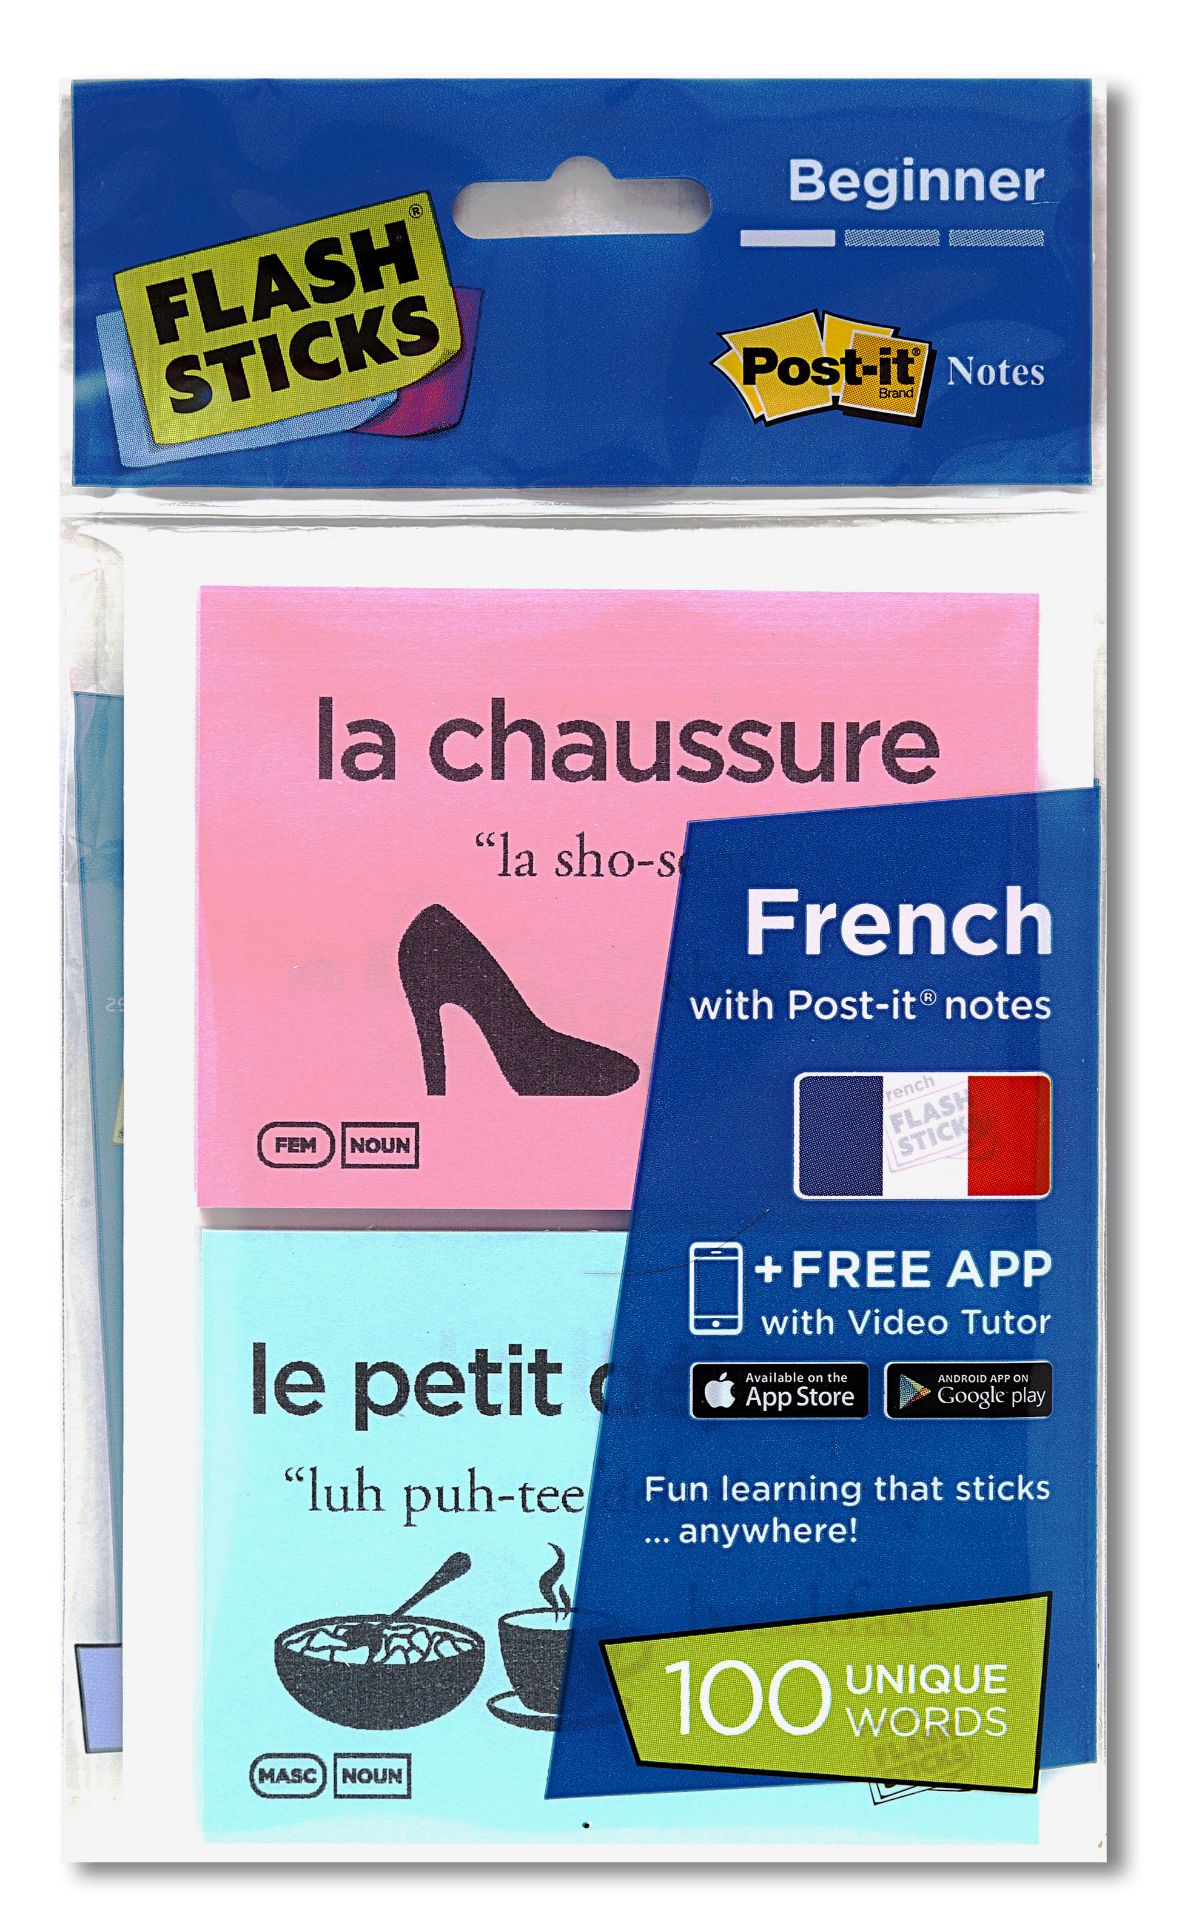 V Brand New Pack Of Approx 10 Flash Sticks To aid Learning French Amazon Price £5.25 EACH X 2 YOUR - Bild 2 aus 2